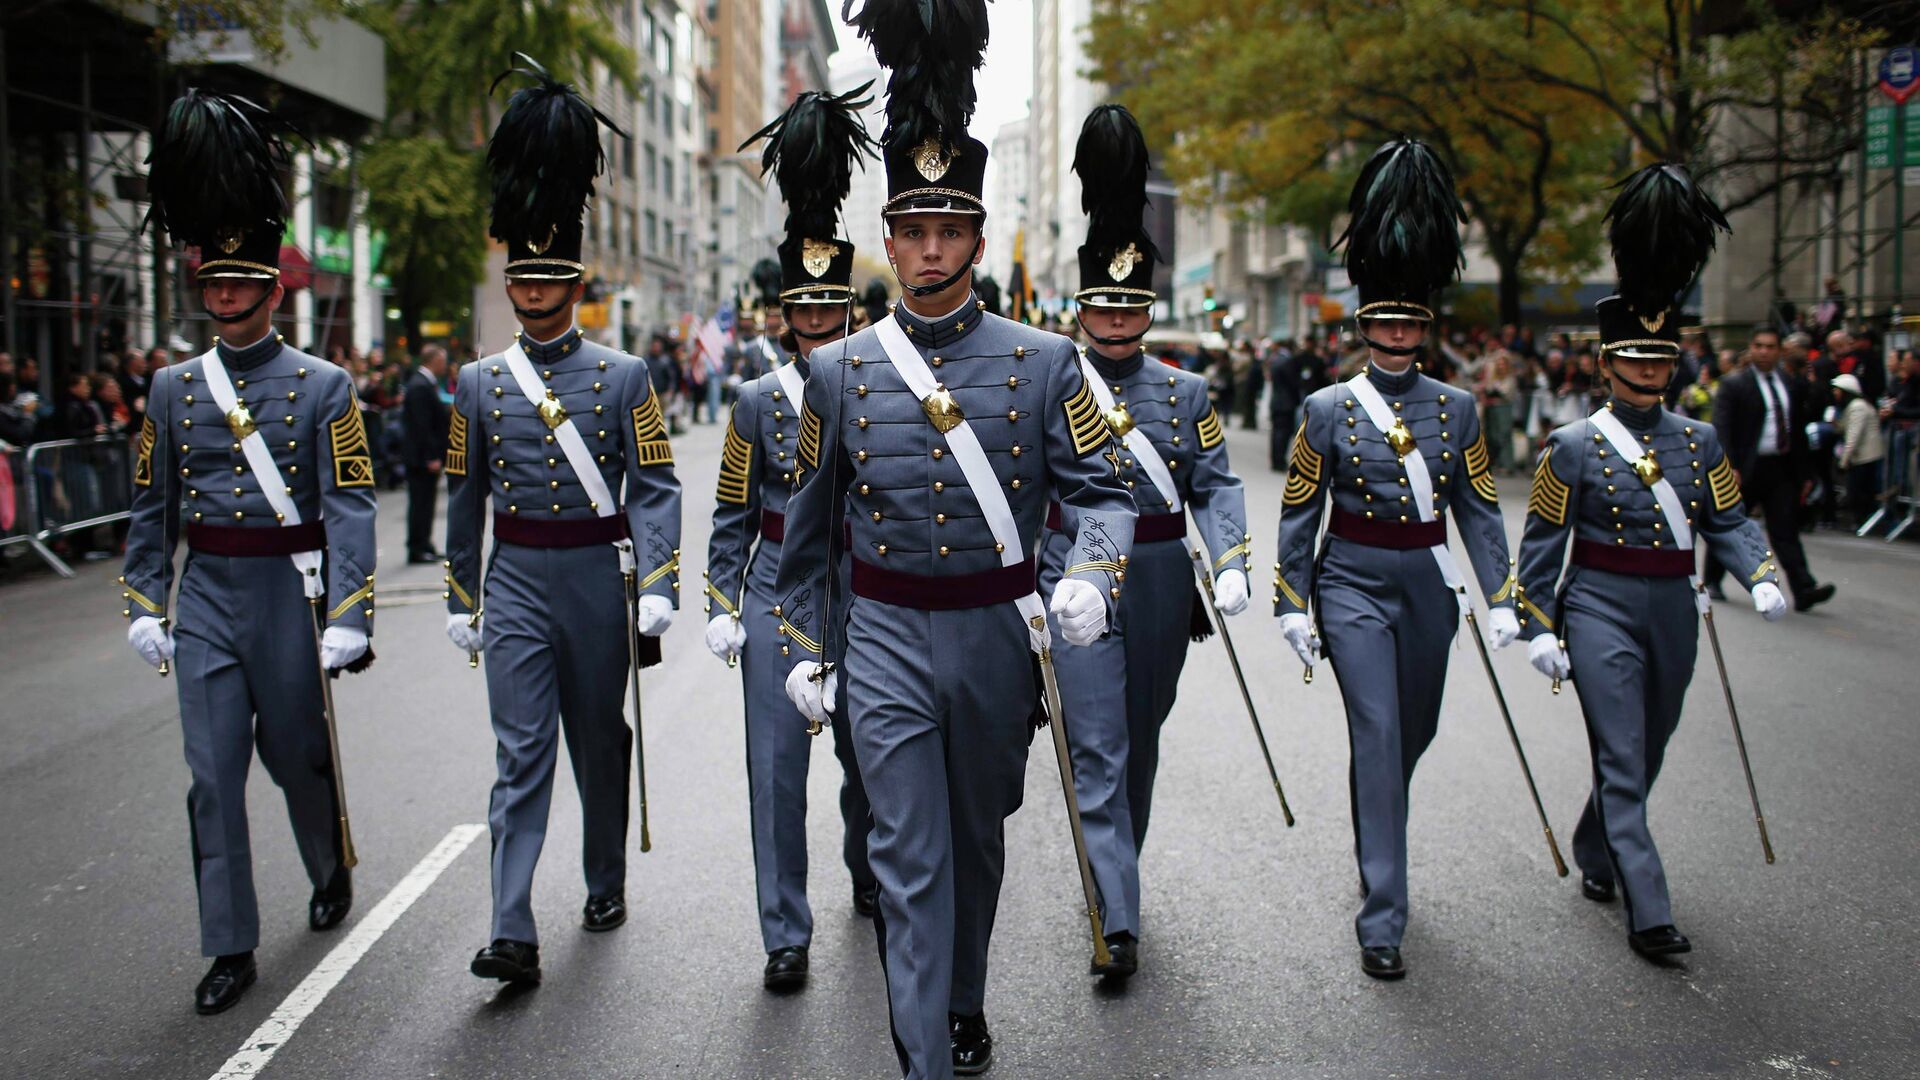 Cadets from the United States Military Academy at West Point, New York march during the Veterans Day parade on 5th Avenue in New York November 11, 2014 - Sputnik International, 1920, 10.09.2021